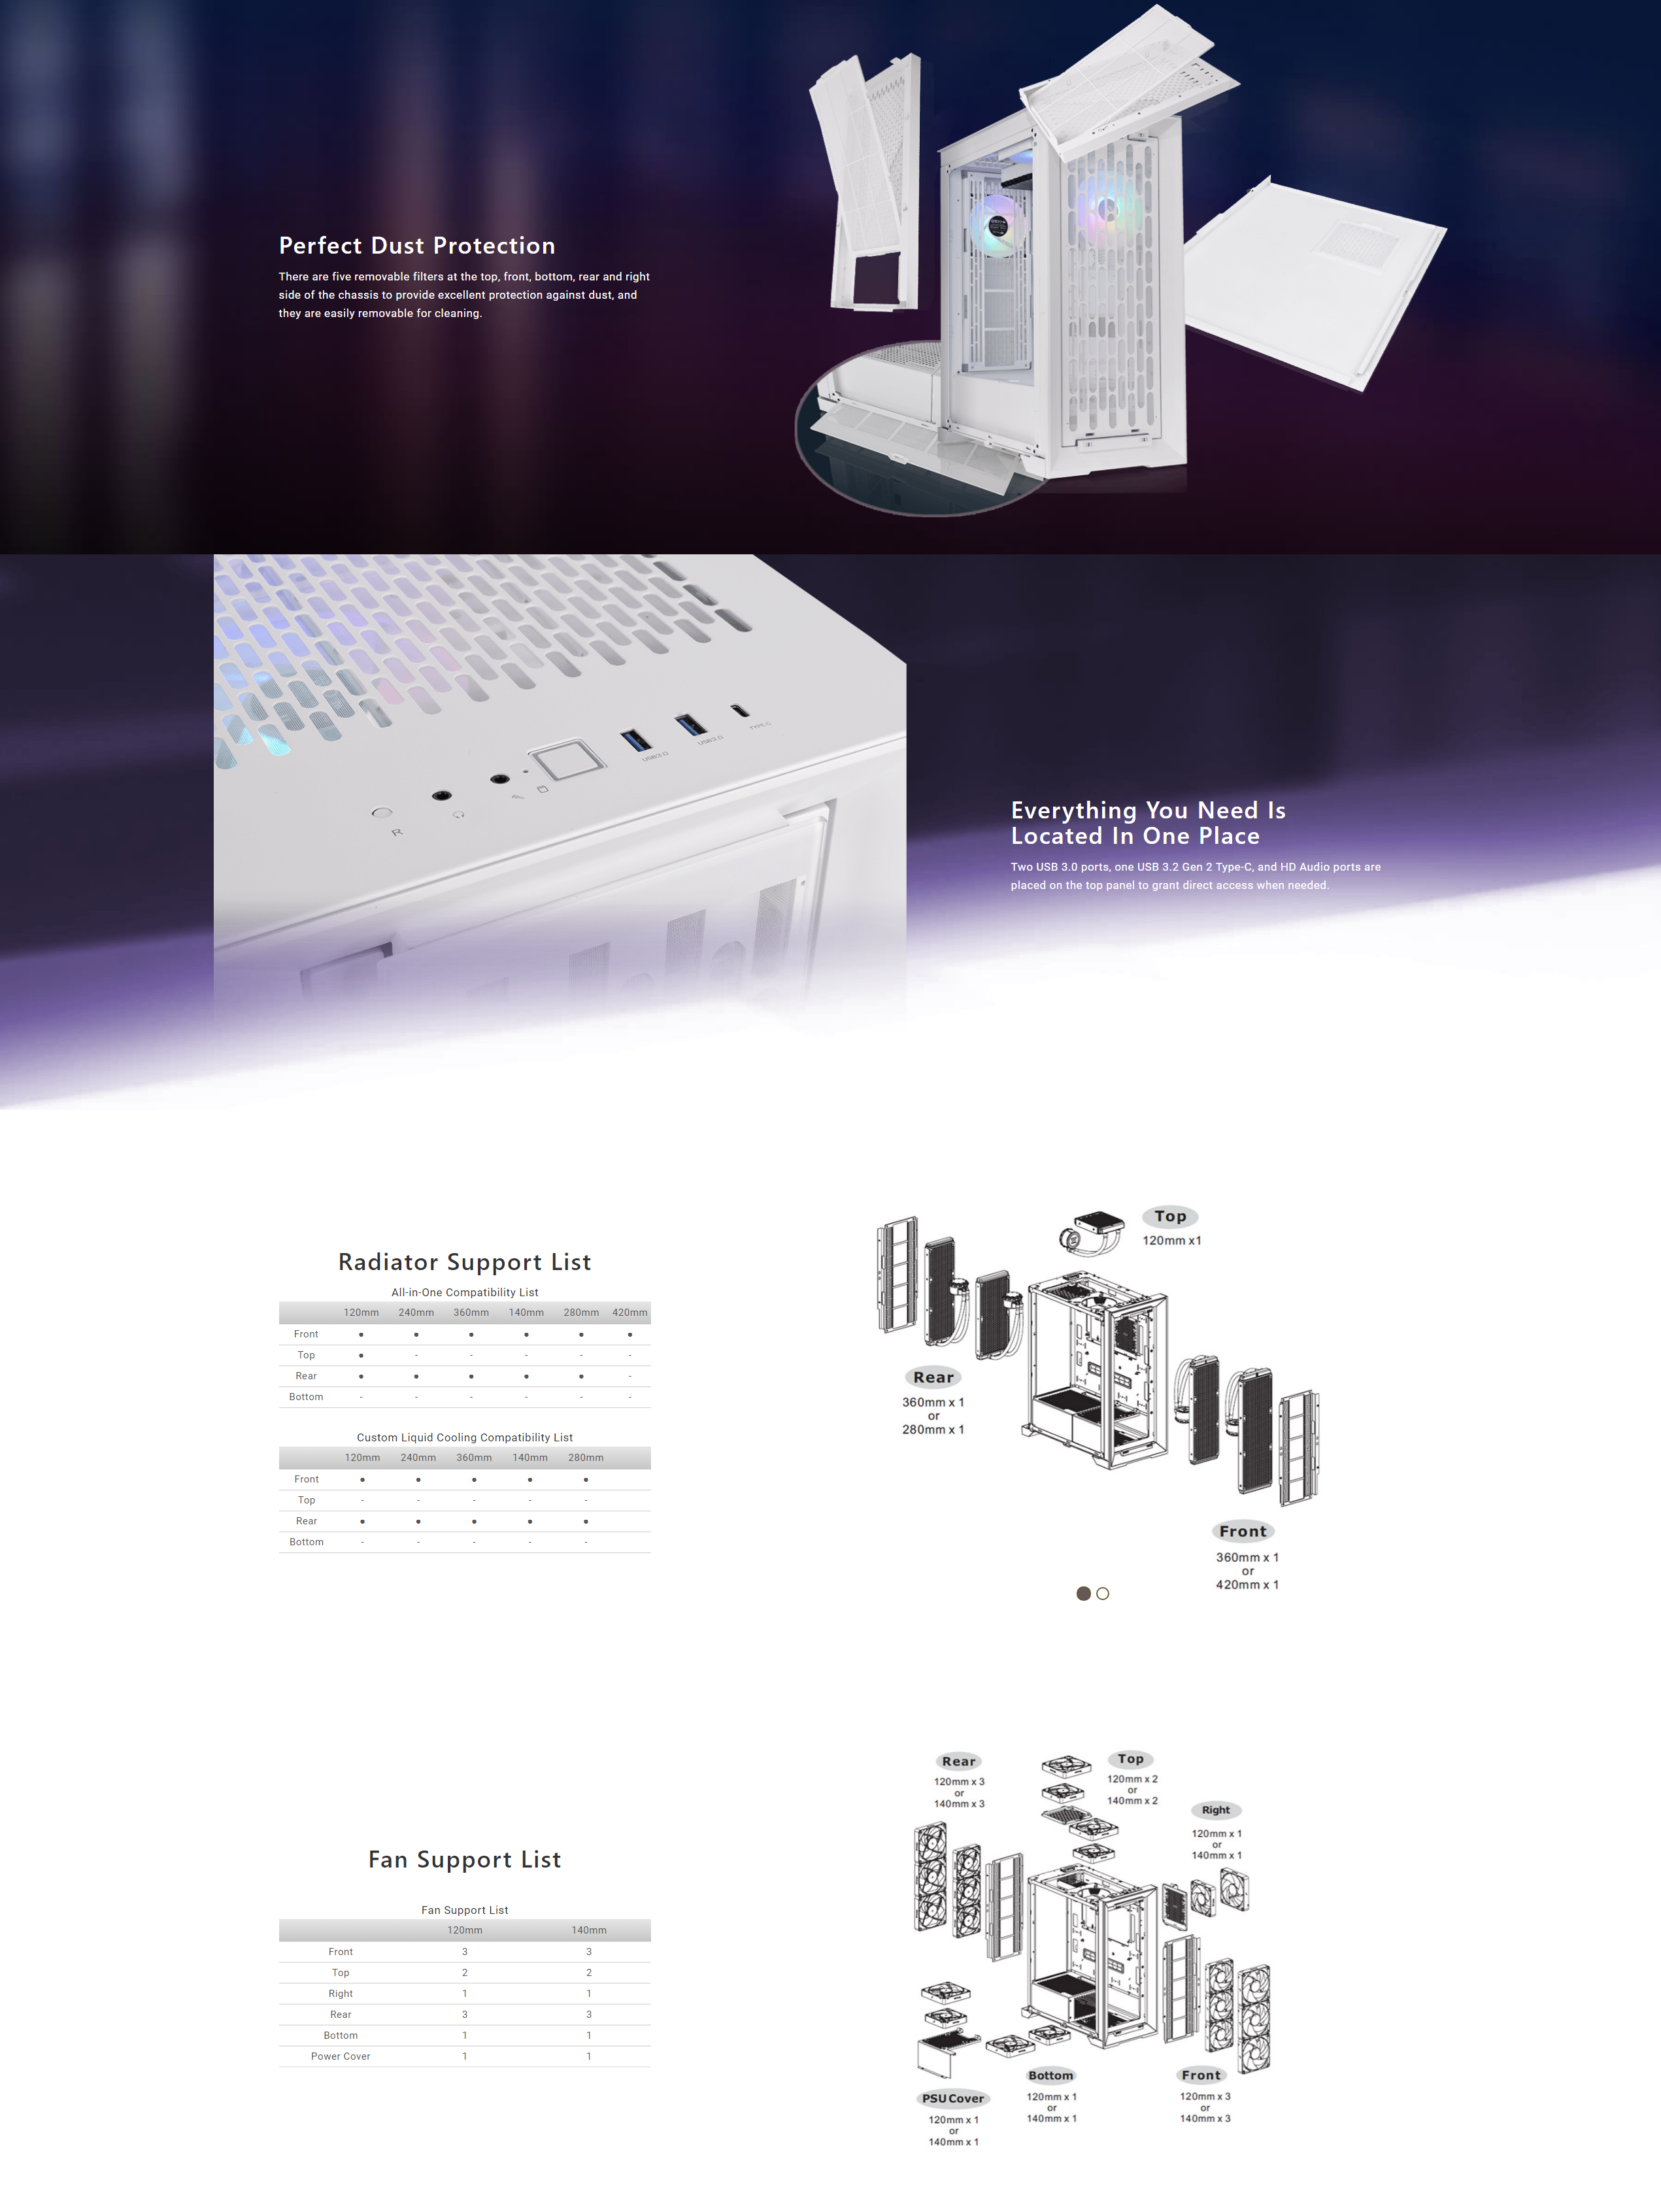 A large marketing image providing additional information about the product Thermaltake CTE T500 - ARGB Full Tower Case (Snow) - Additional alt info not provided